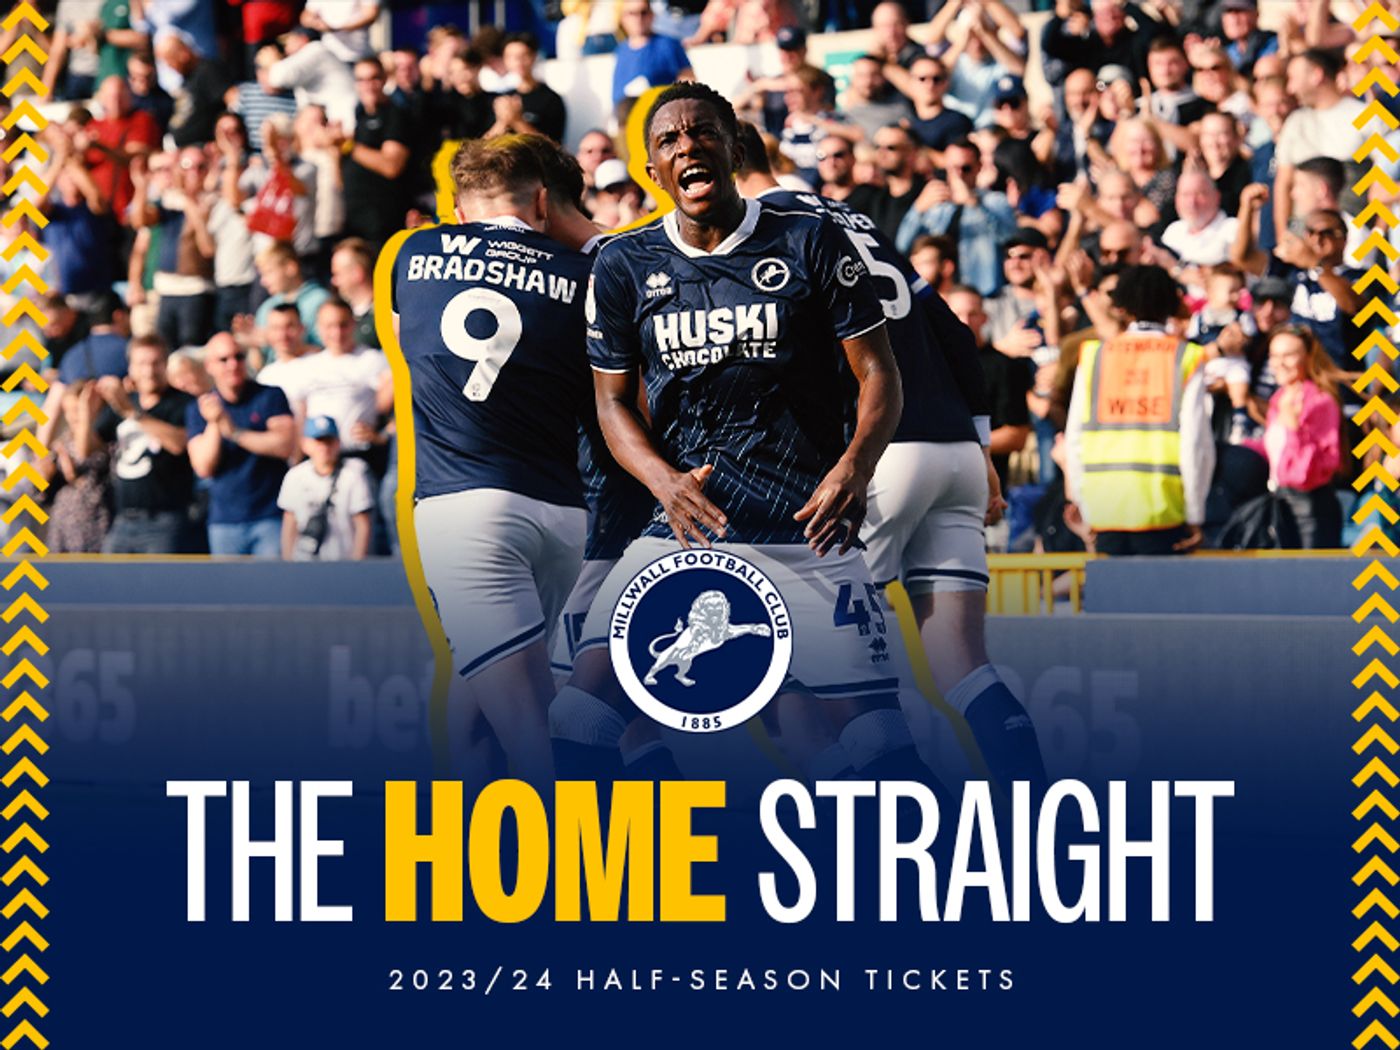 Millwall FC vs Queens Park Rangers Tickets & Hospitality